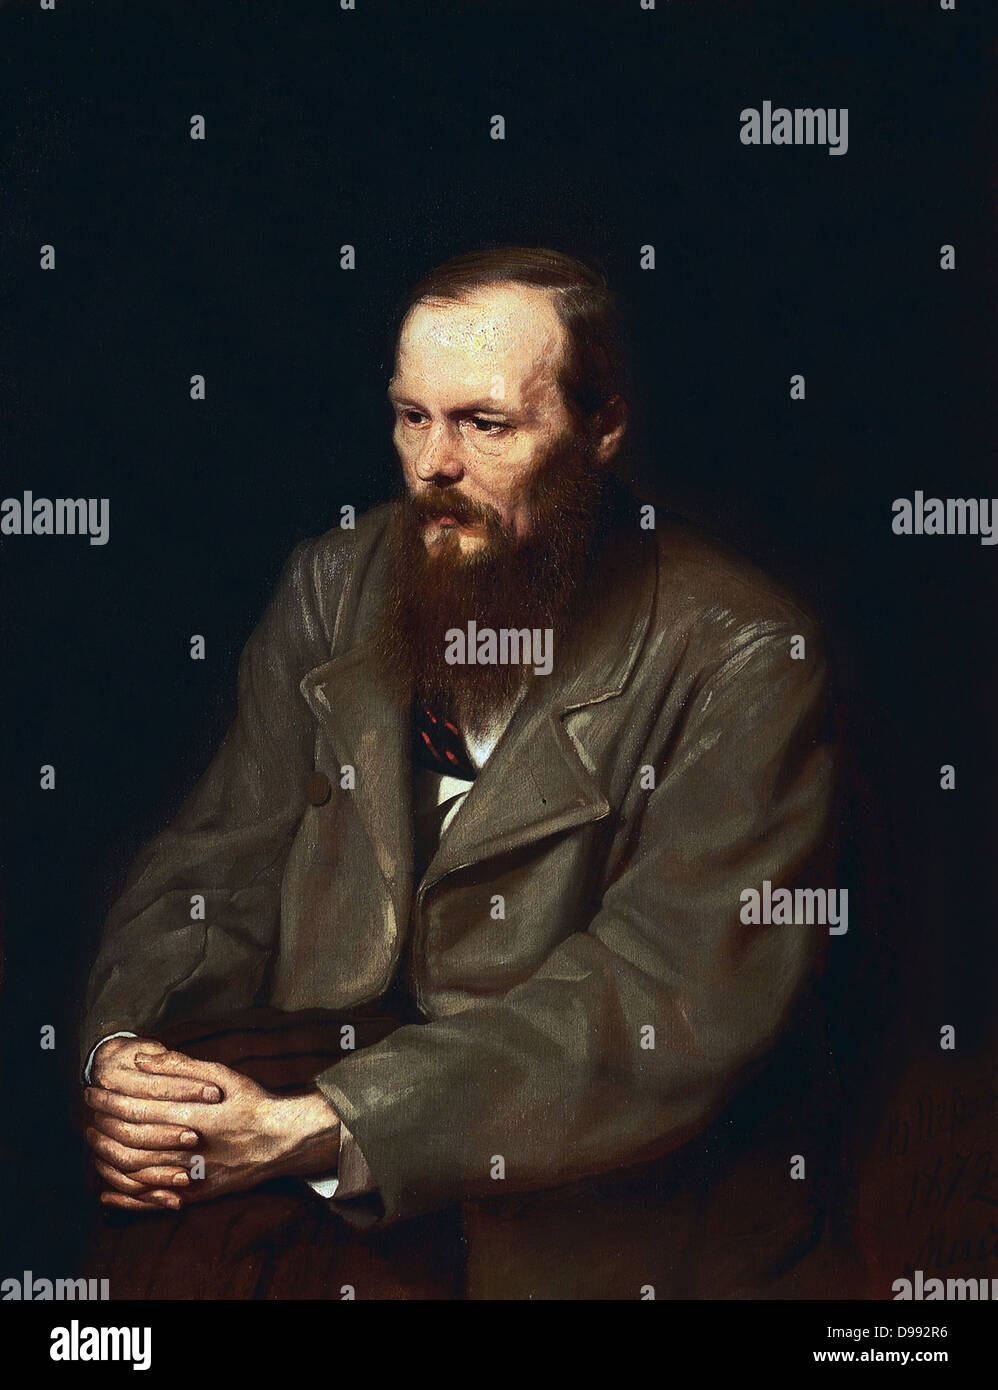 Fyodor Dostoevsky (1821-1881), 1872, Russian novelist and essayist. Oil on canvas. Vasili Perov (1833-1882) Russian painter. Three-quarter length portrait, seated, with hands clasped round knees. Literature Fiction Suspense Stock Photo